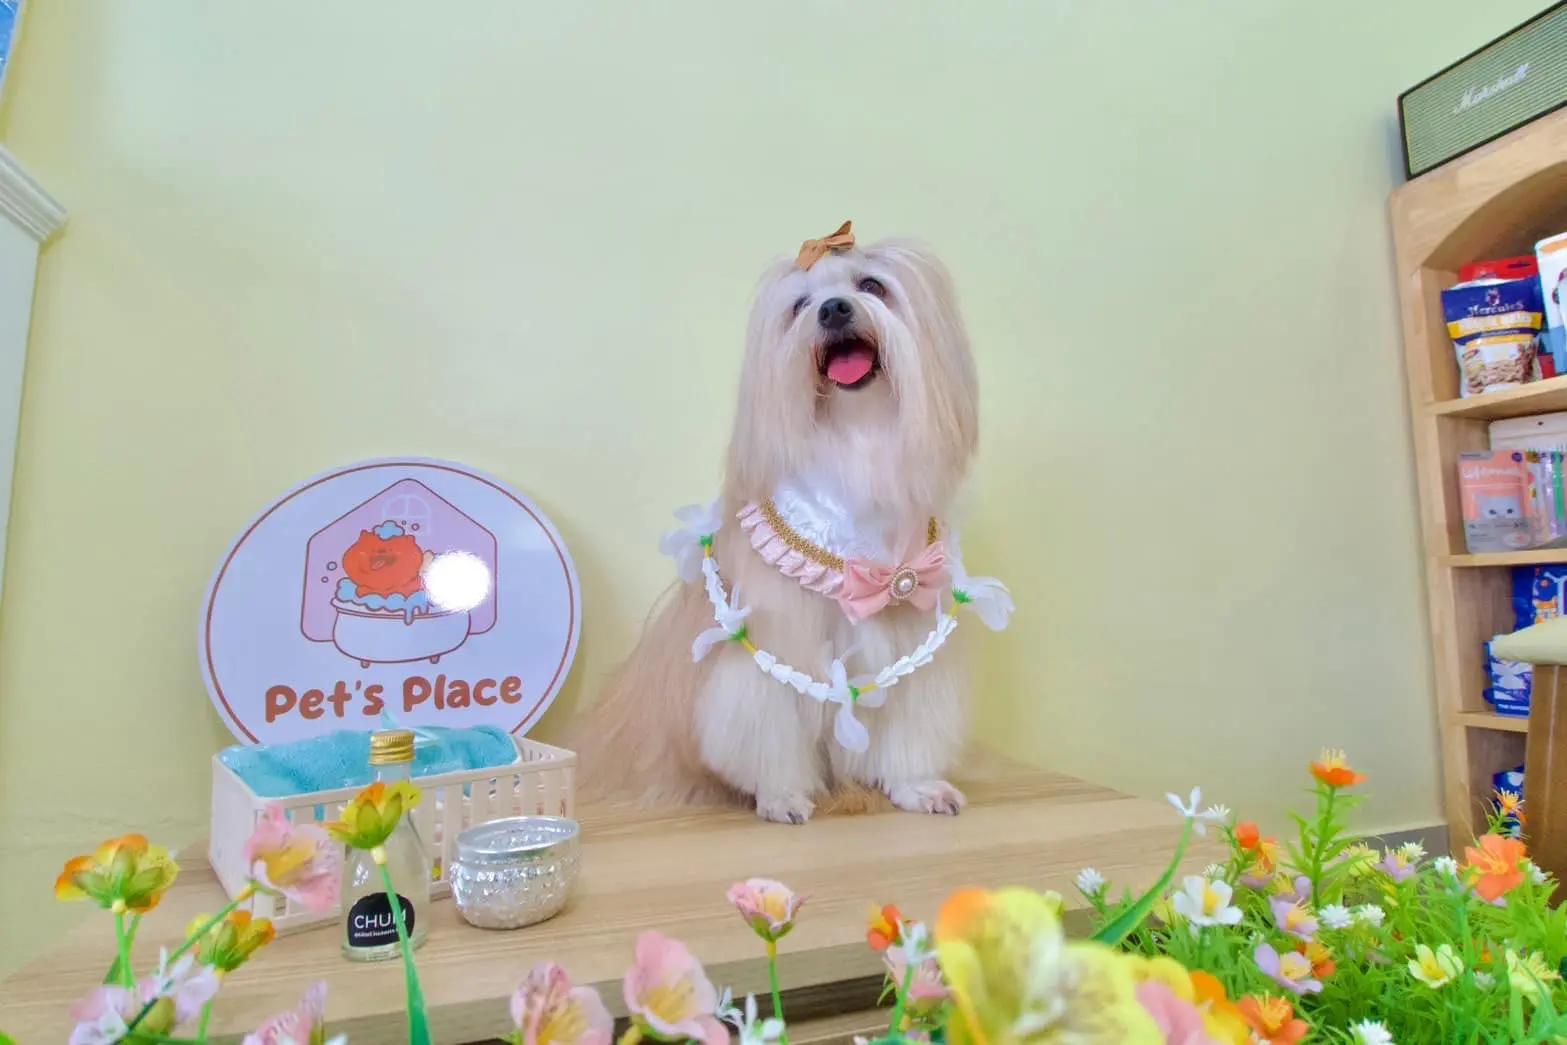 Pet’s Place Grooming Spa & Salon